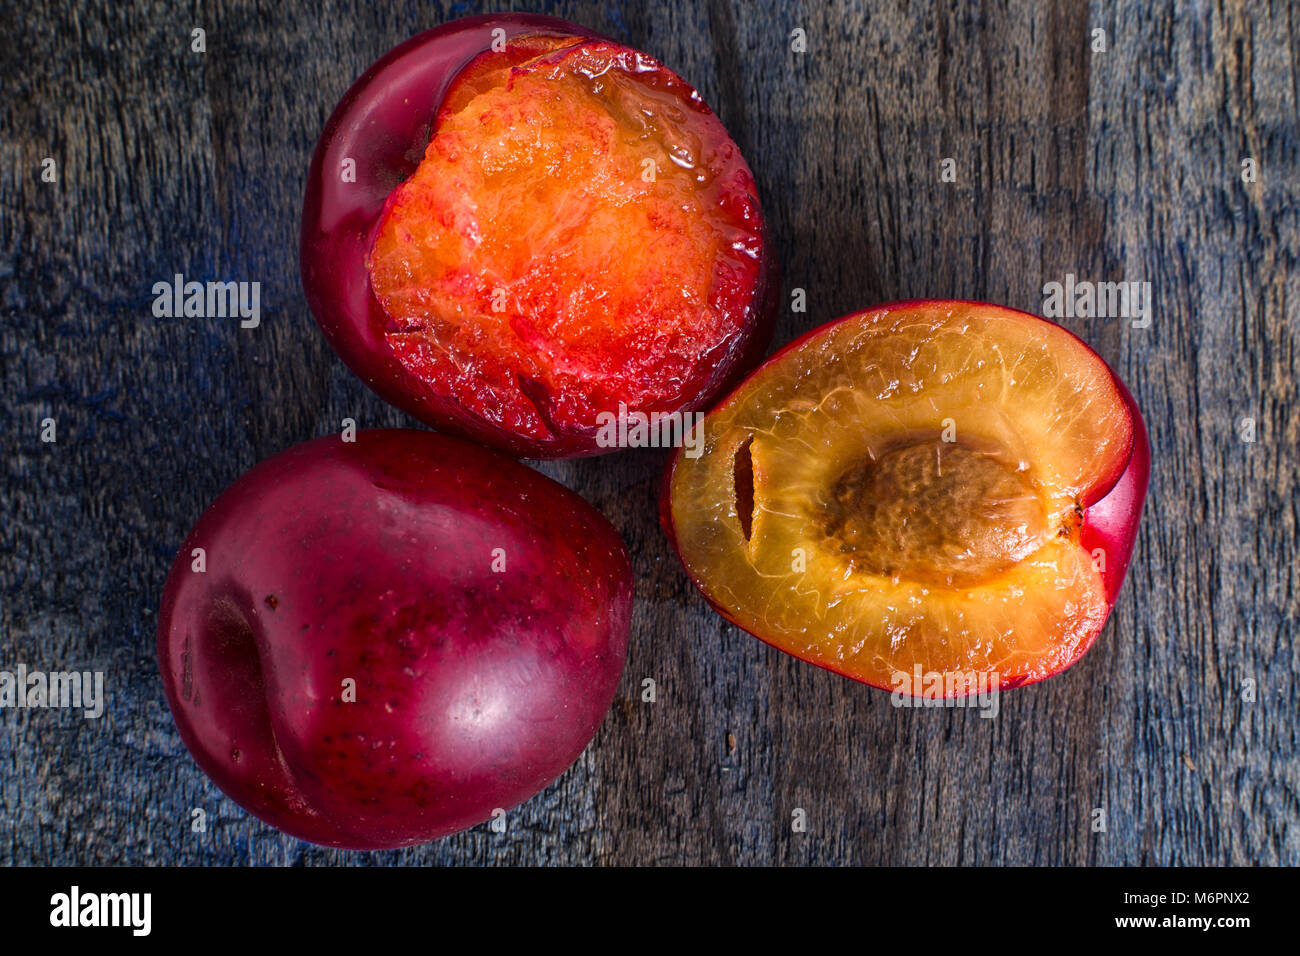 small red plums in Ecuador called claudia Stock Photo